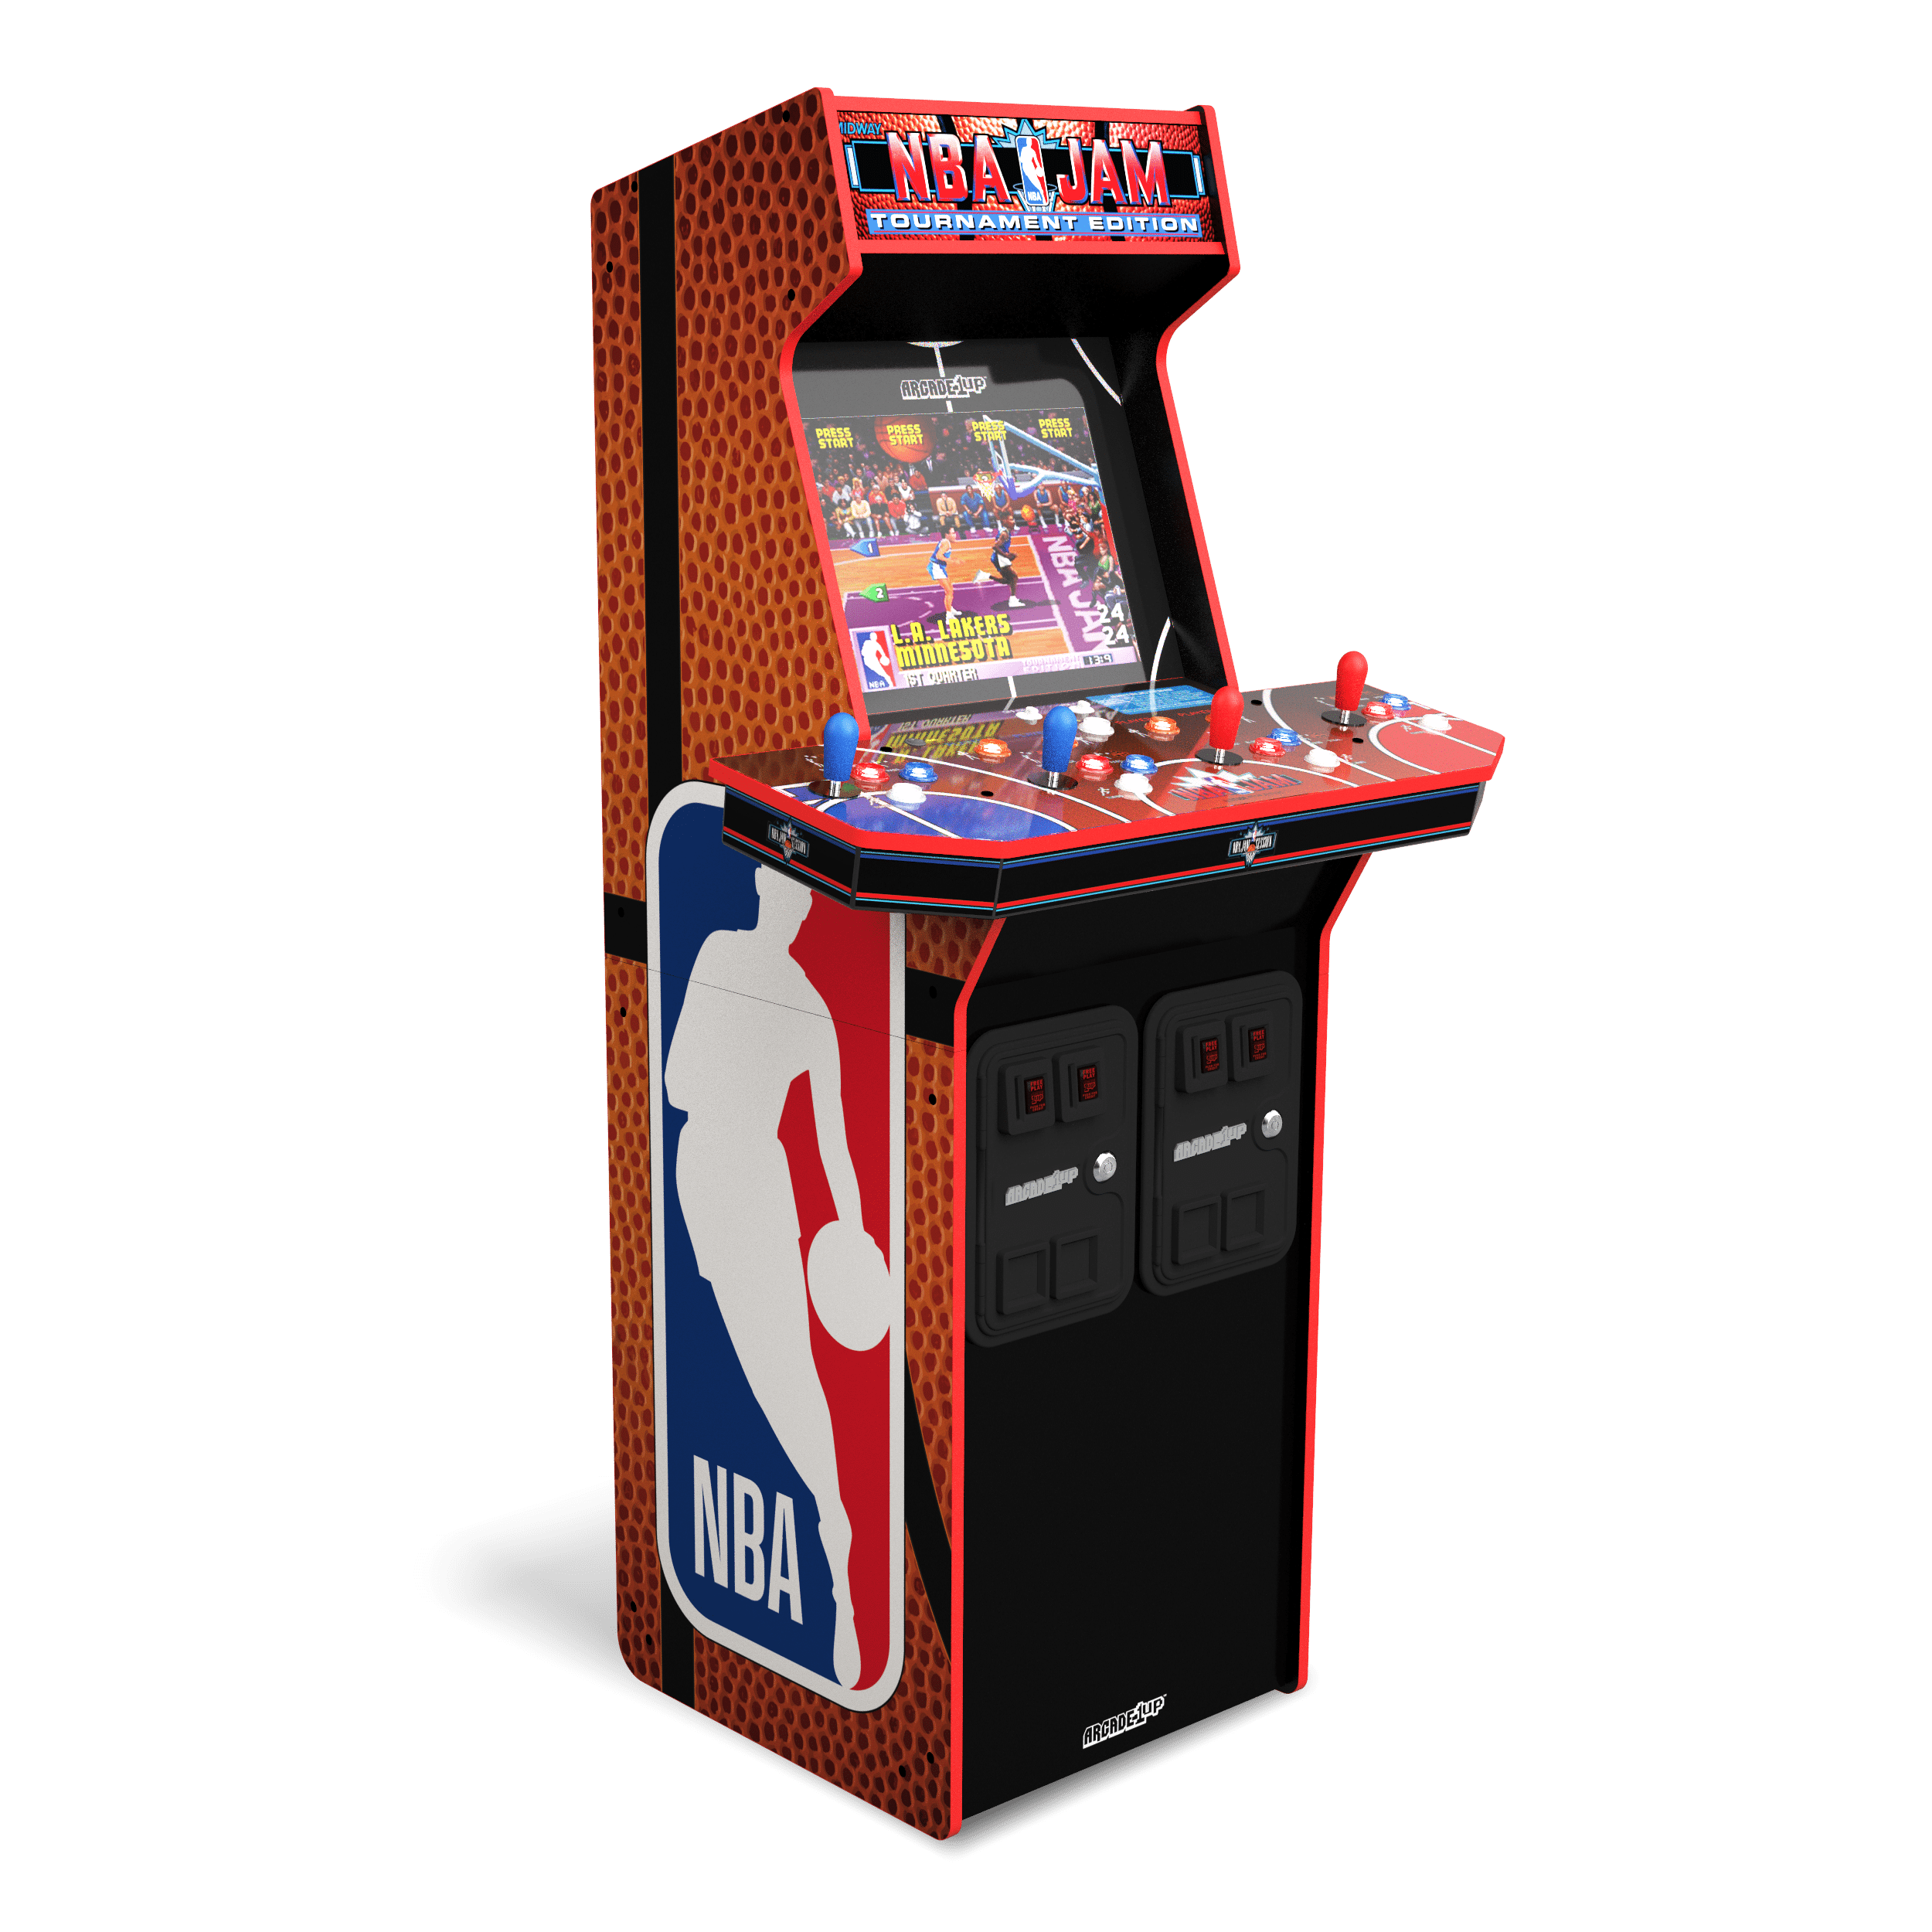 Create an arcade games website, tournament game, game website, and